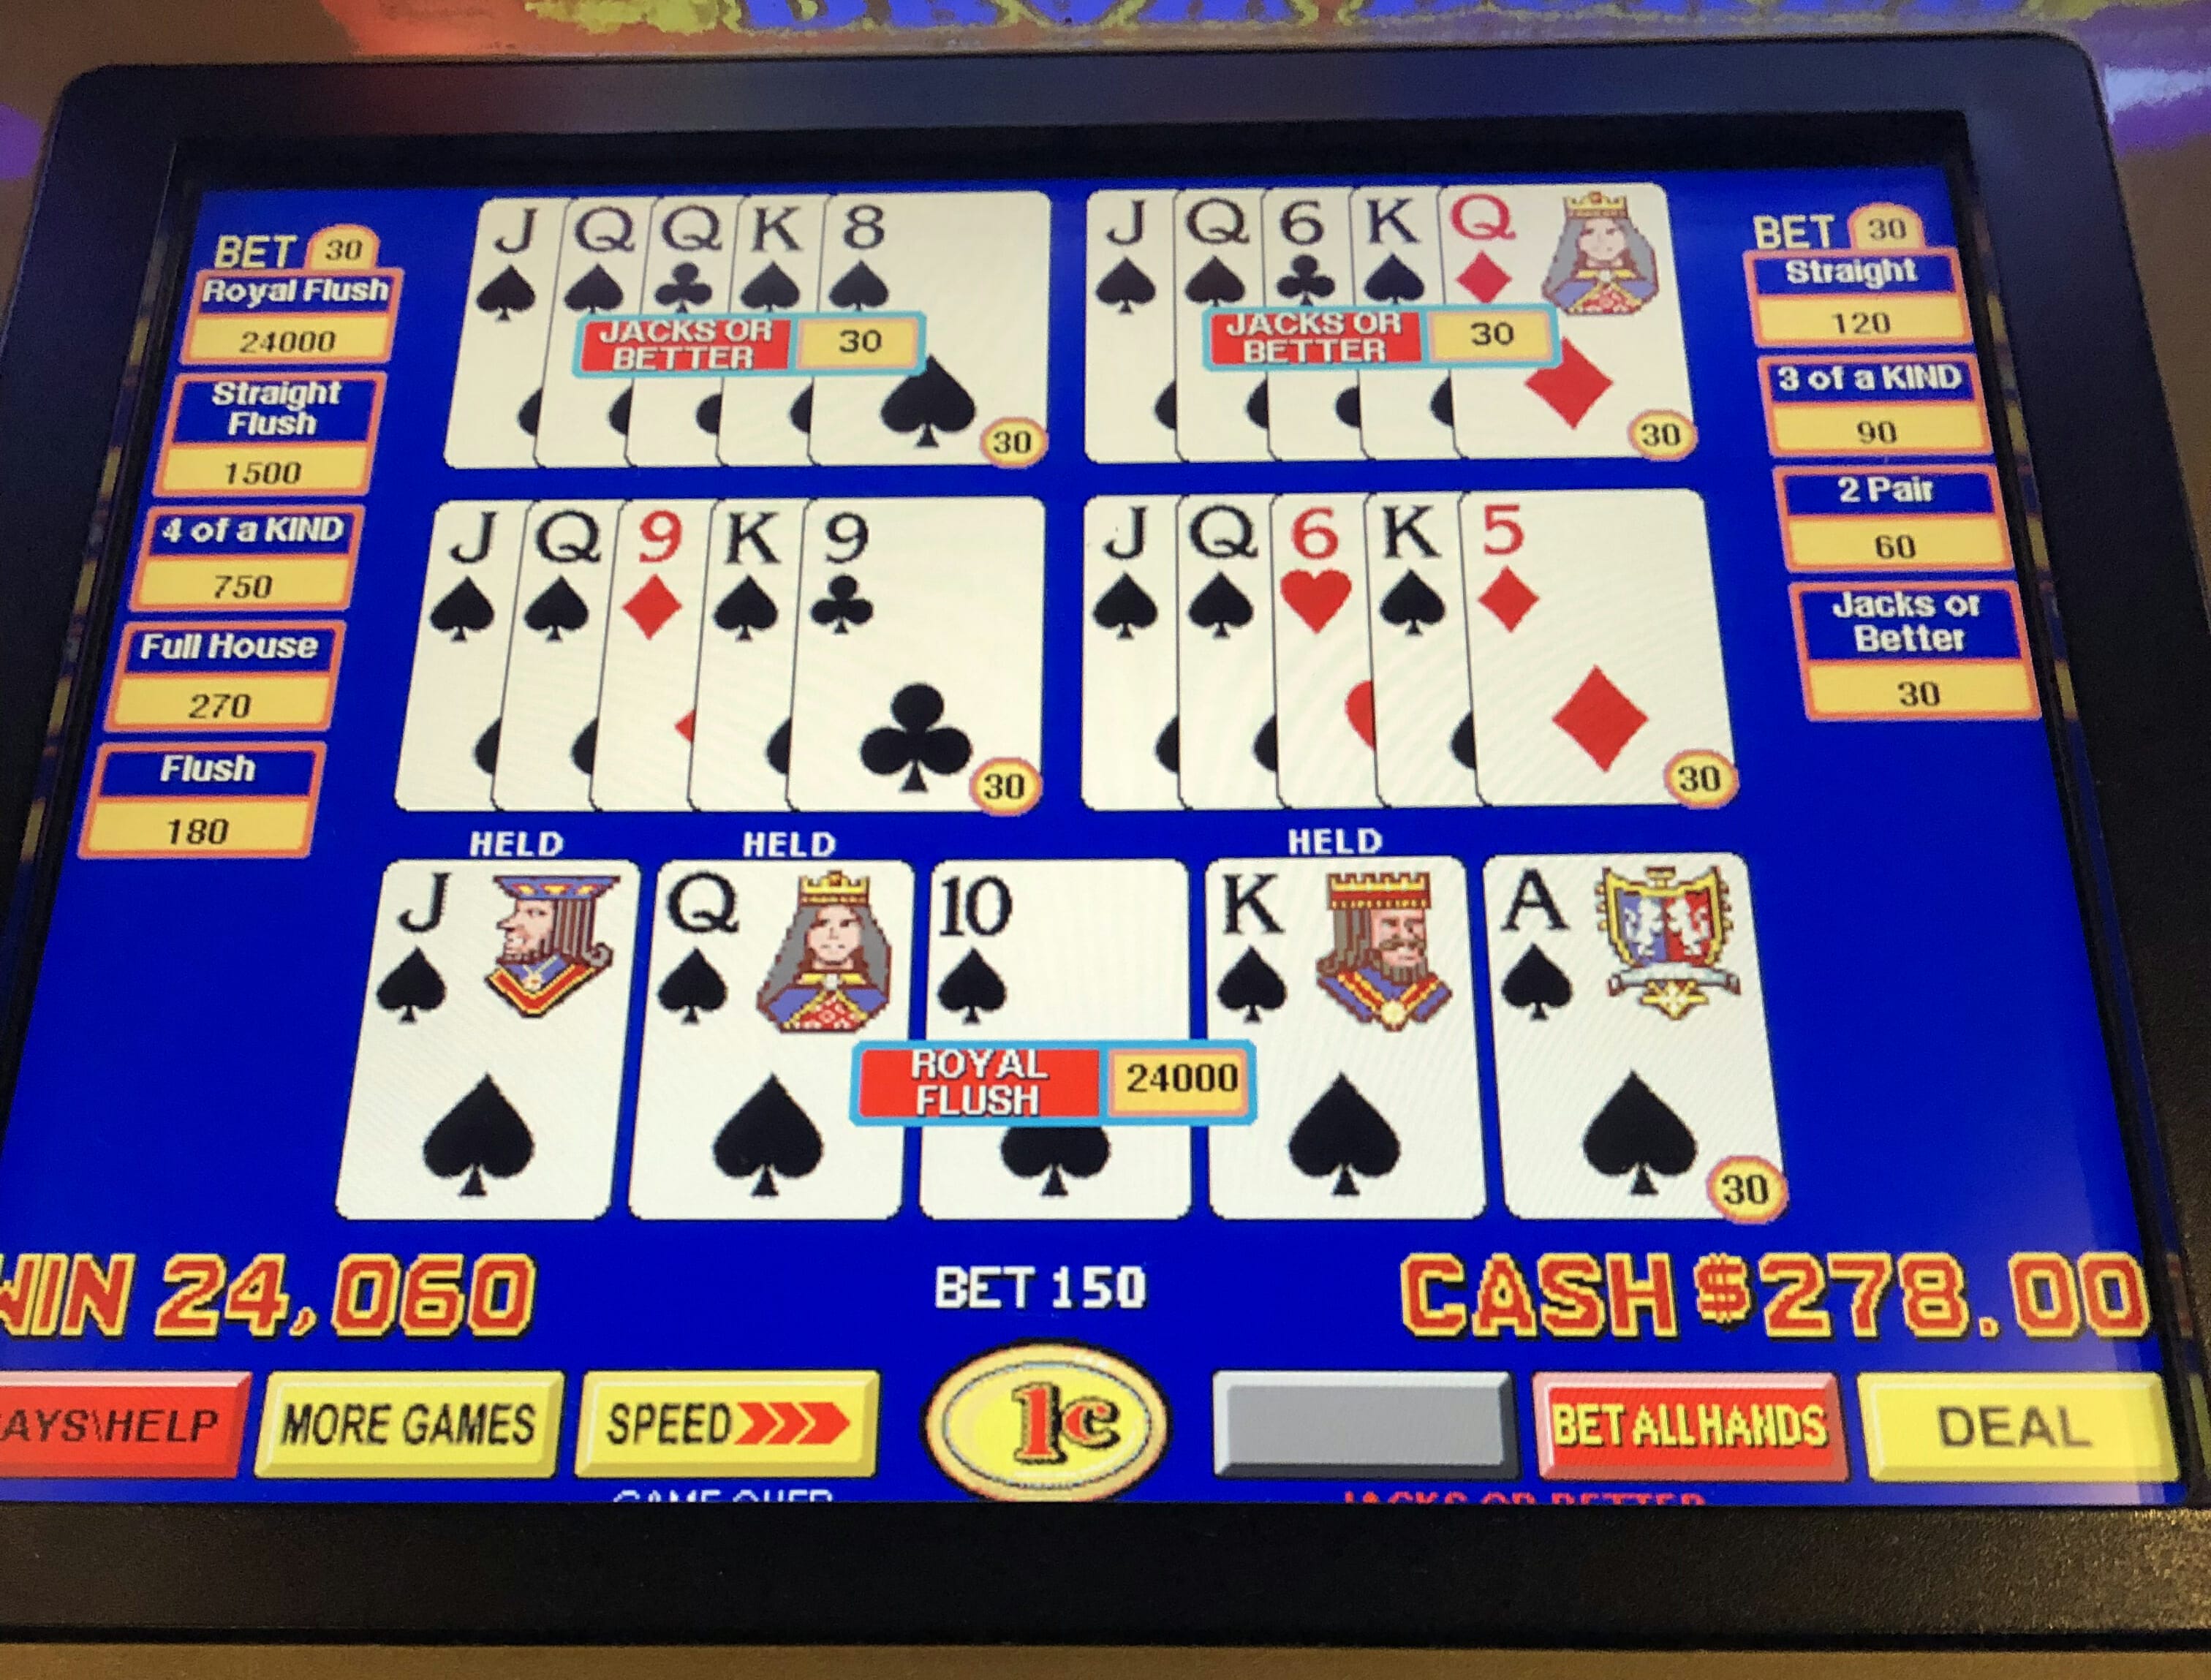 Video Poker - Play the Best Video Poker Games - 9/6